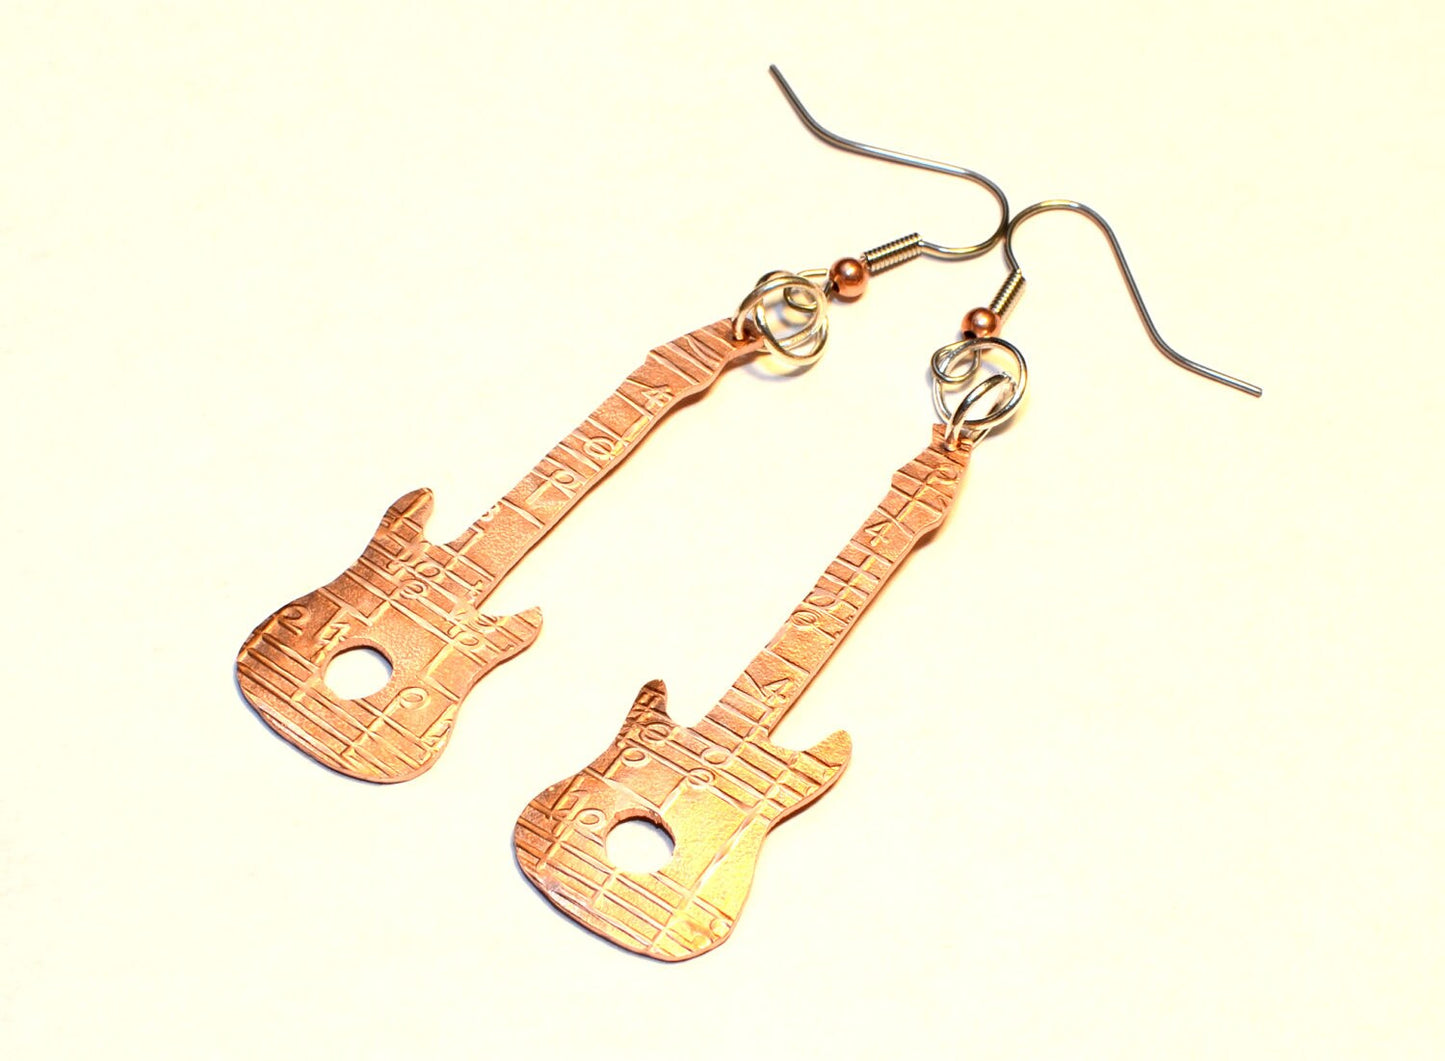 Copper guitar shaped earrings with music notes